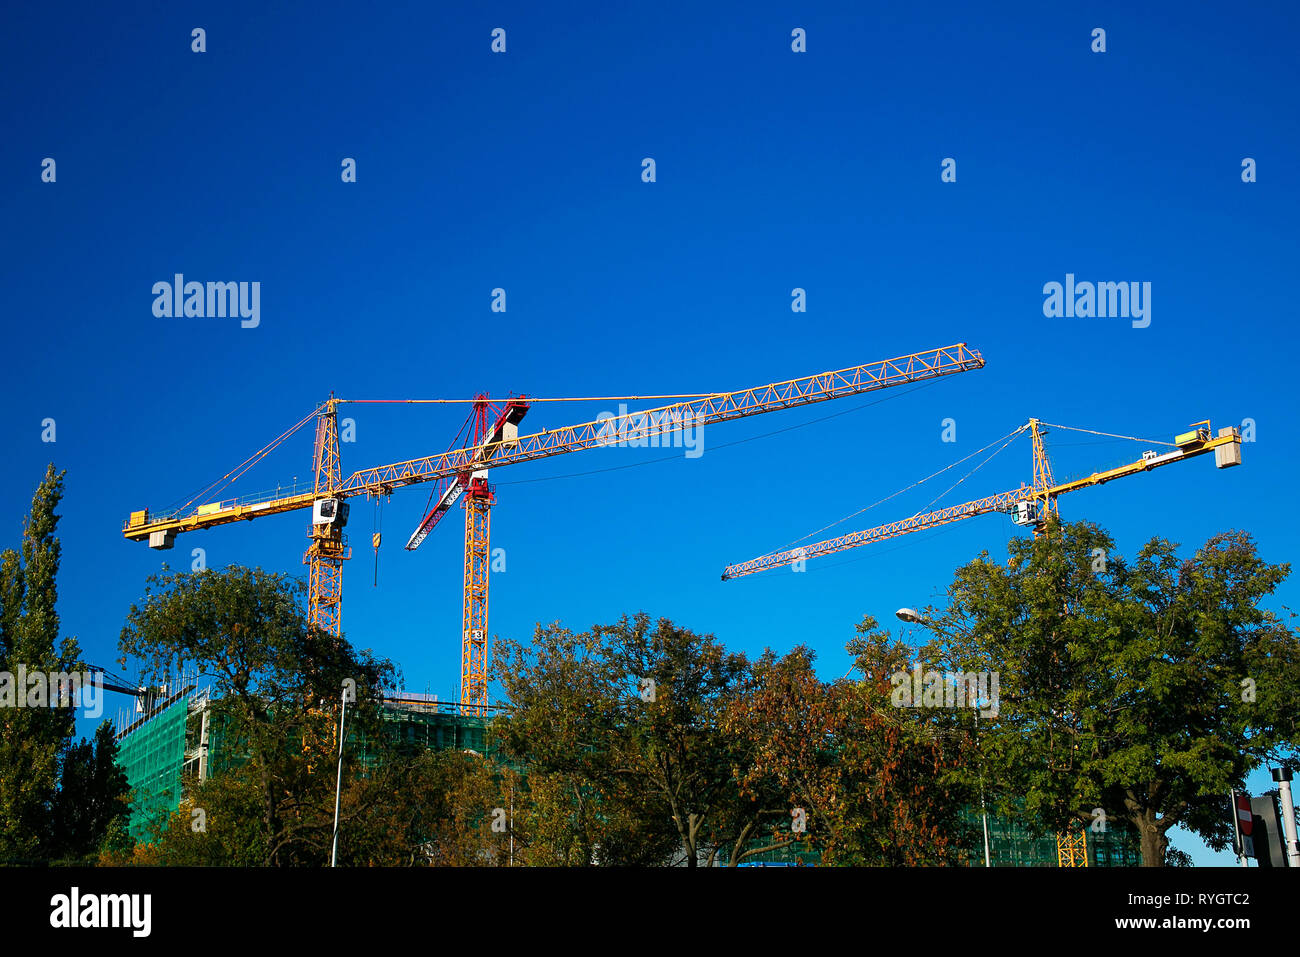 Three cranes towering over trees and constructed building with a blue bright sky as a background Stock Photo